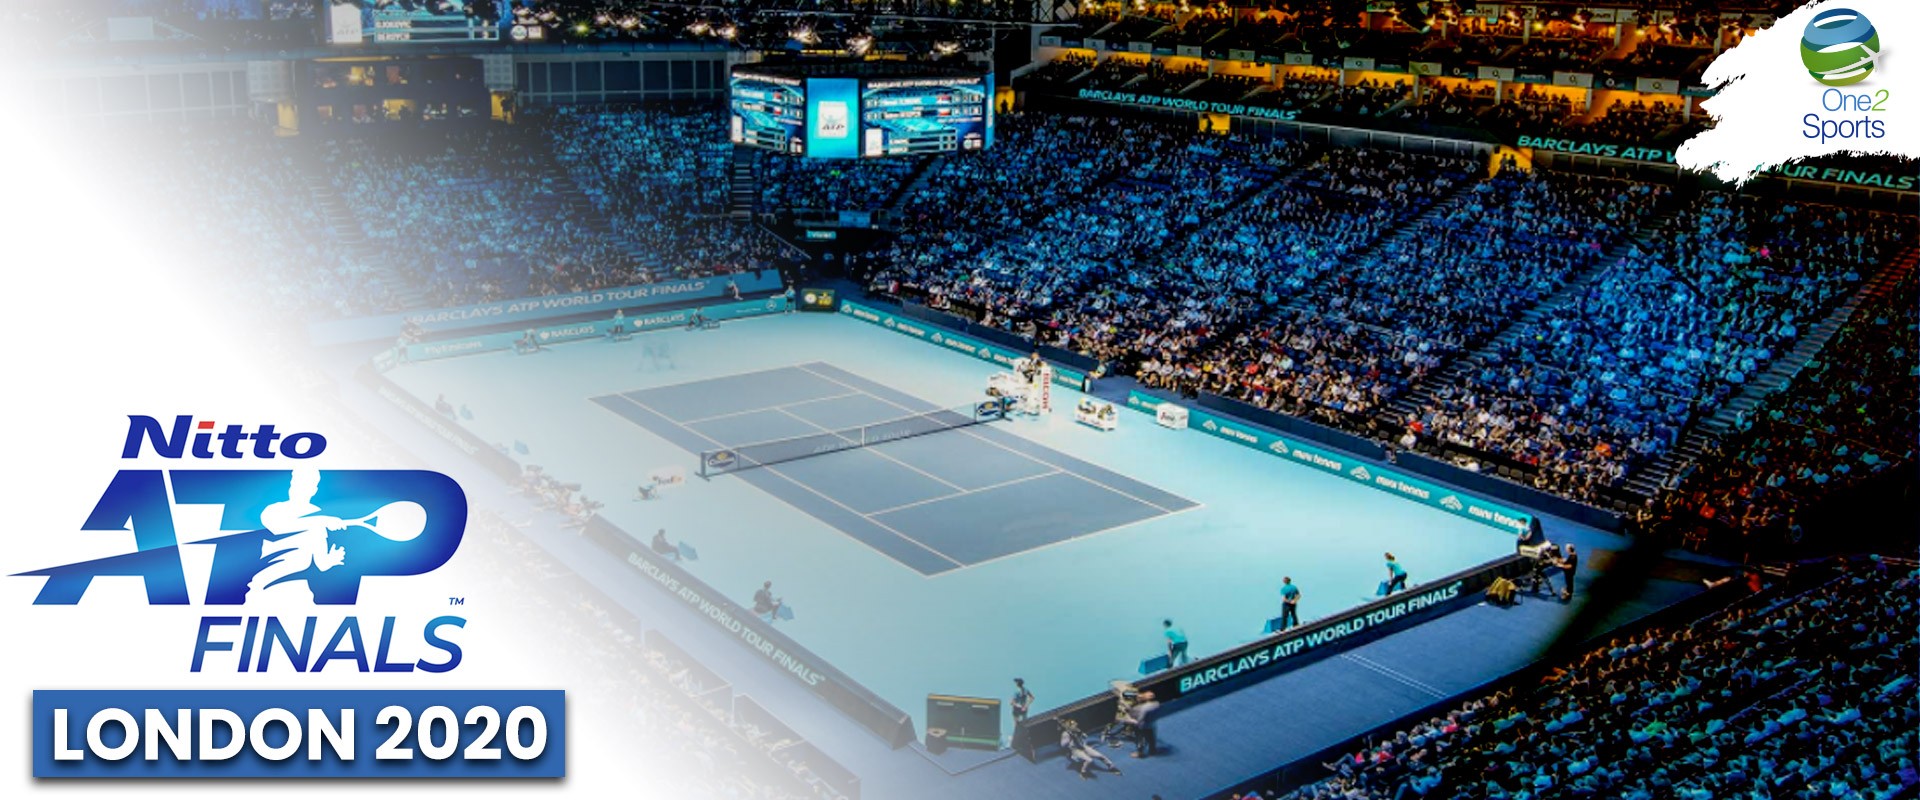 ATP Finals London 2020 One2 Travel Group